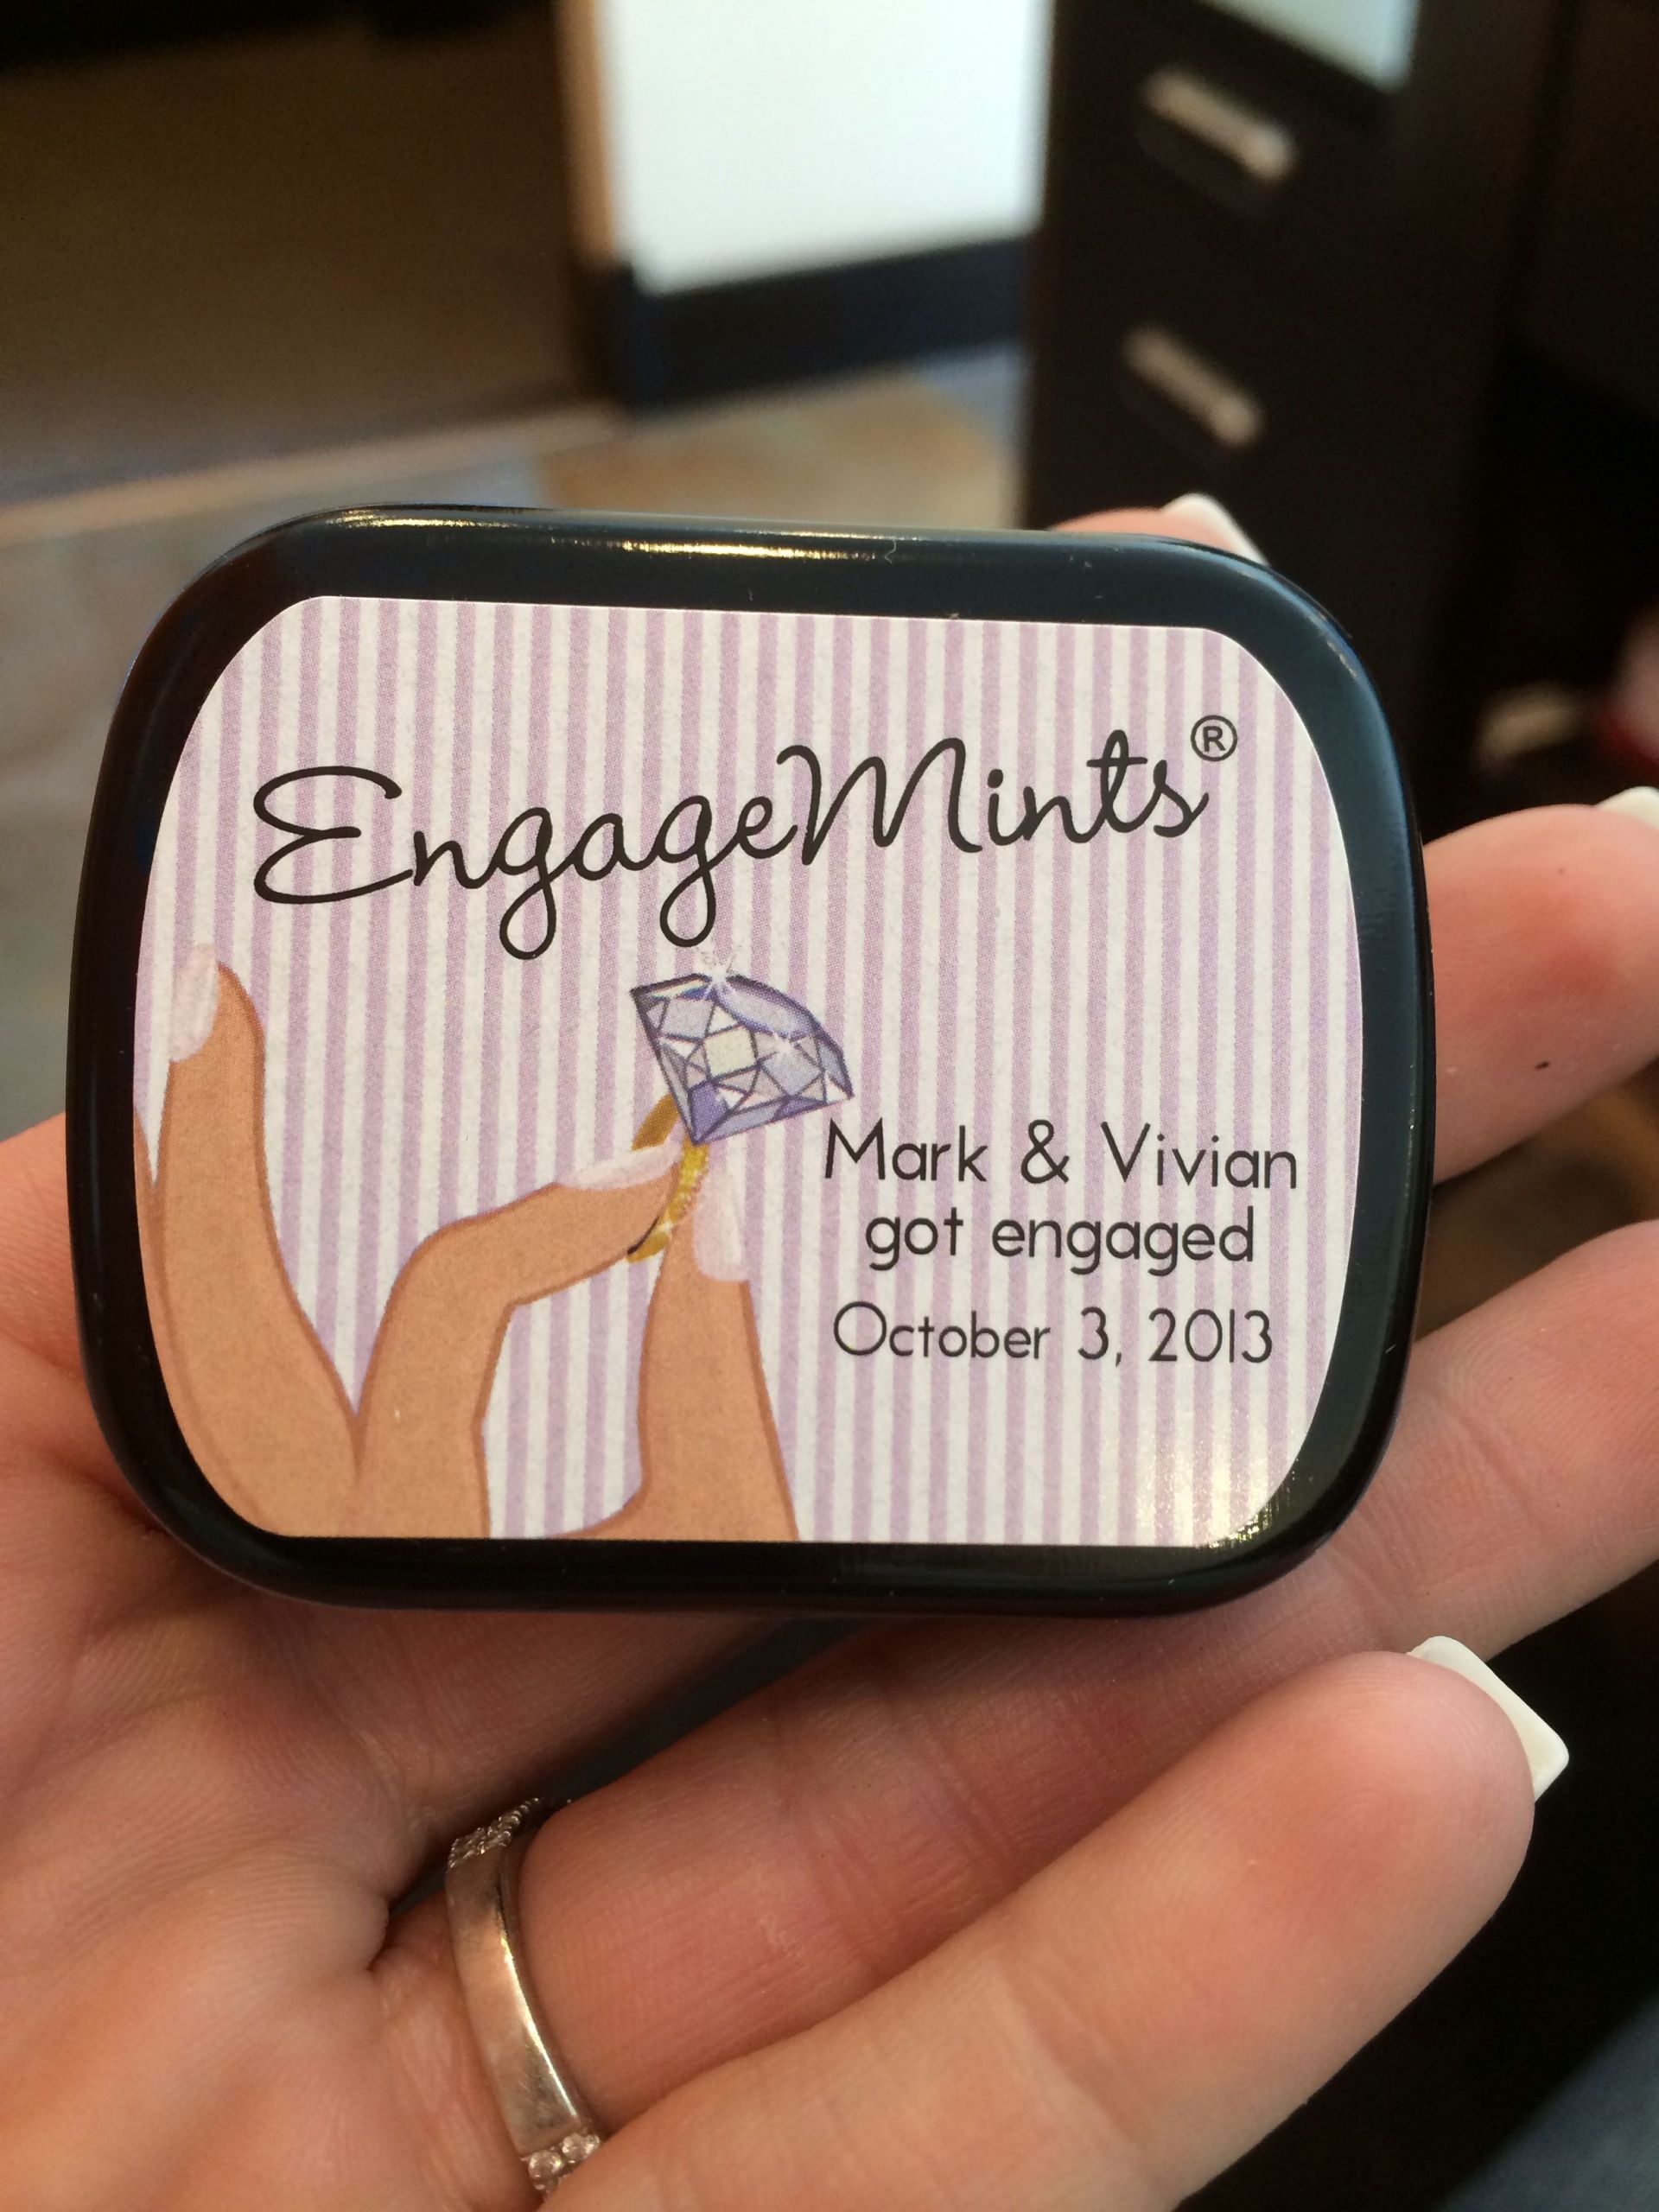 Engagement Party Gifts Ideas
 Engagemints Great idea for our engagement party favors